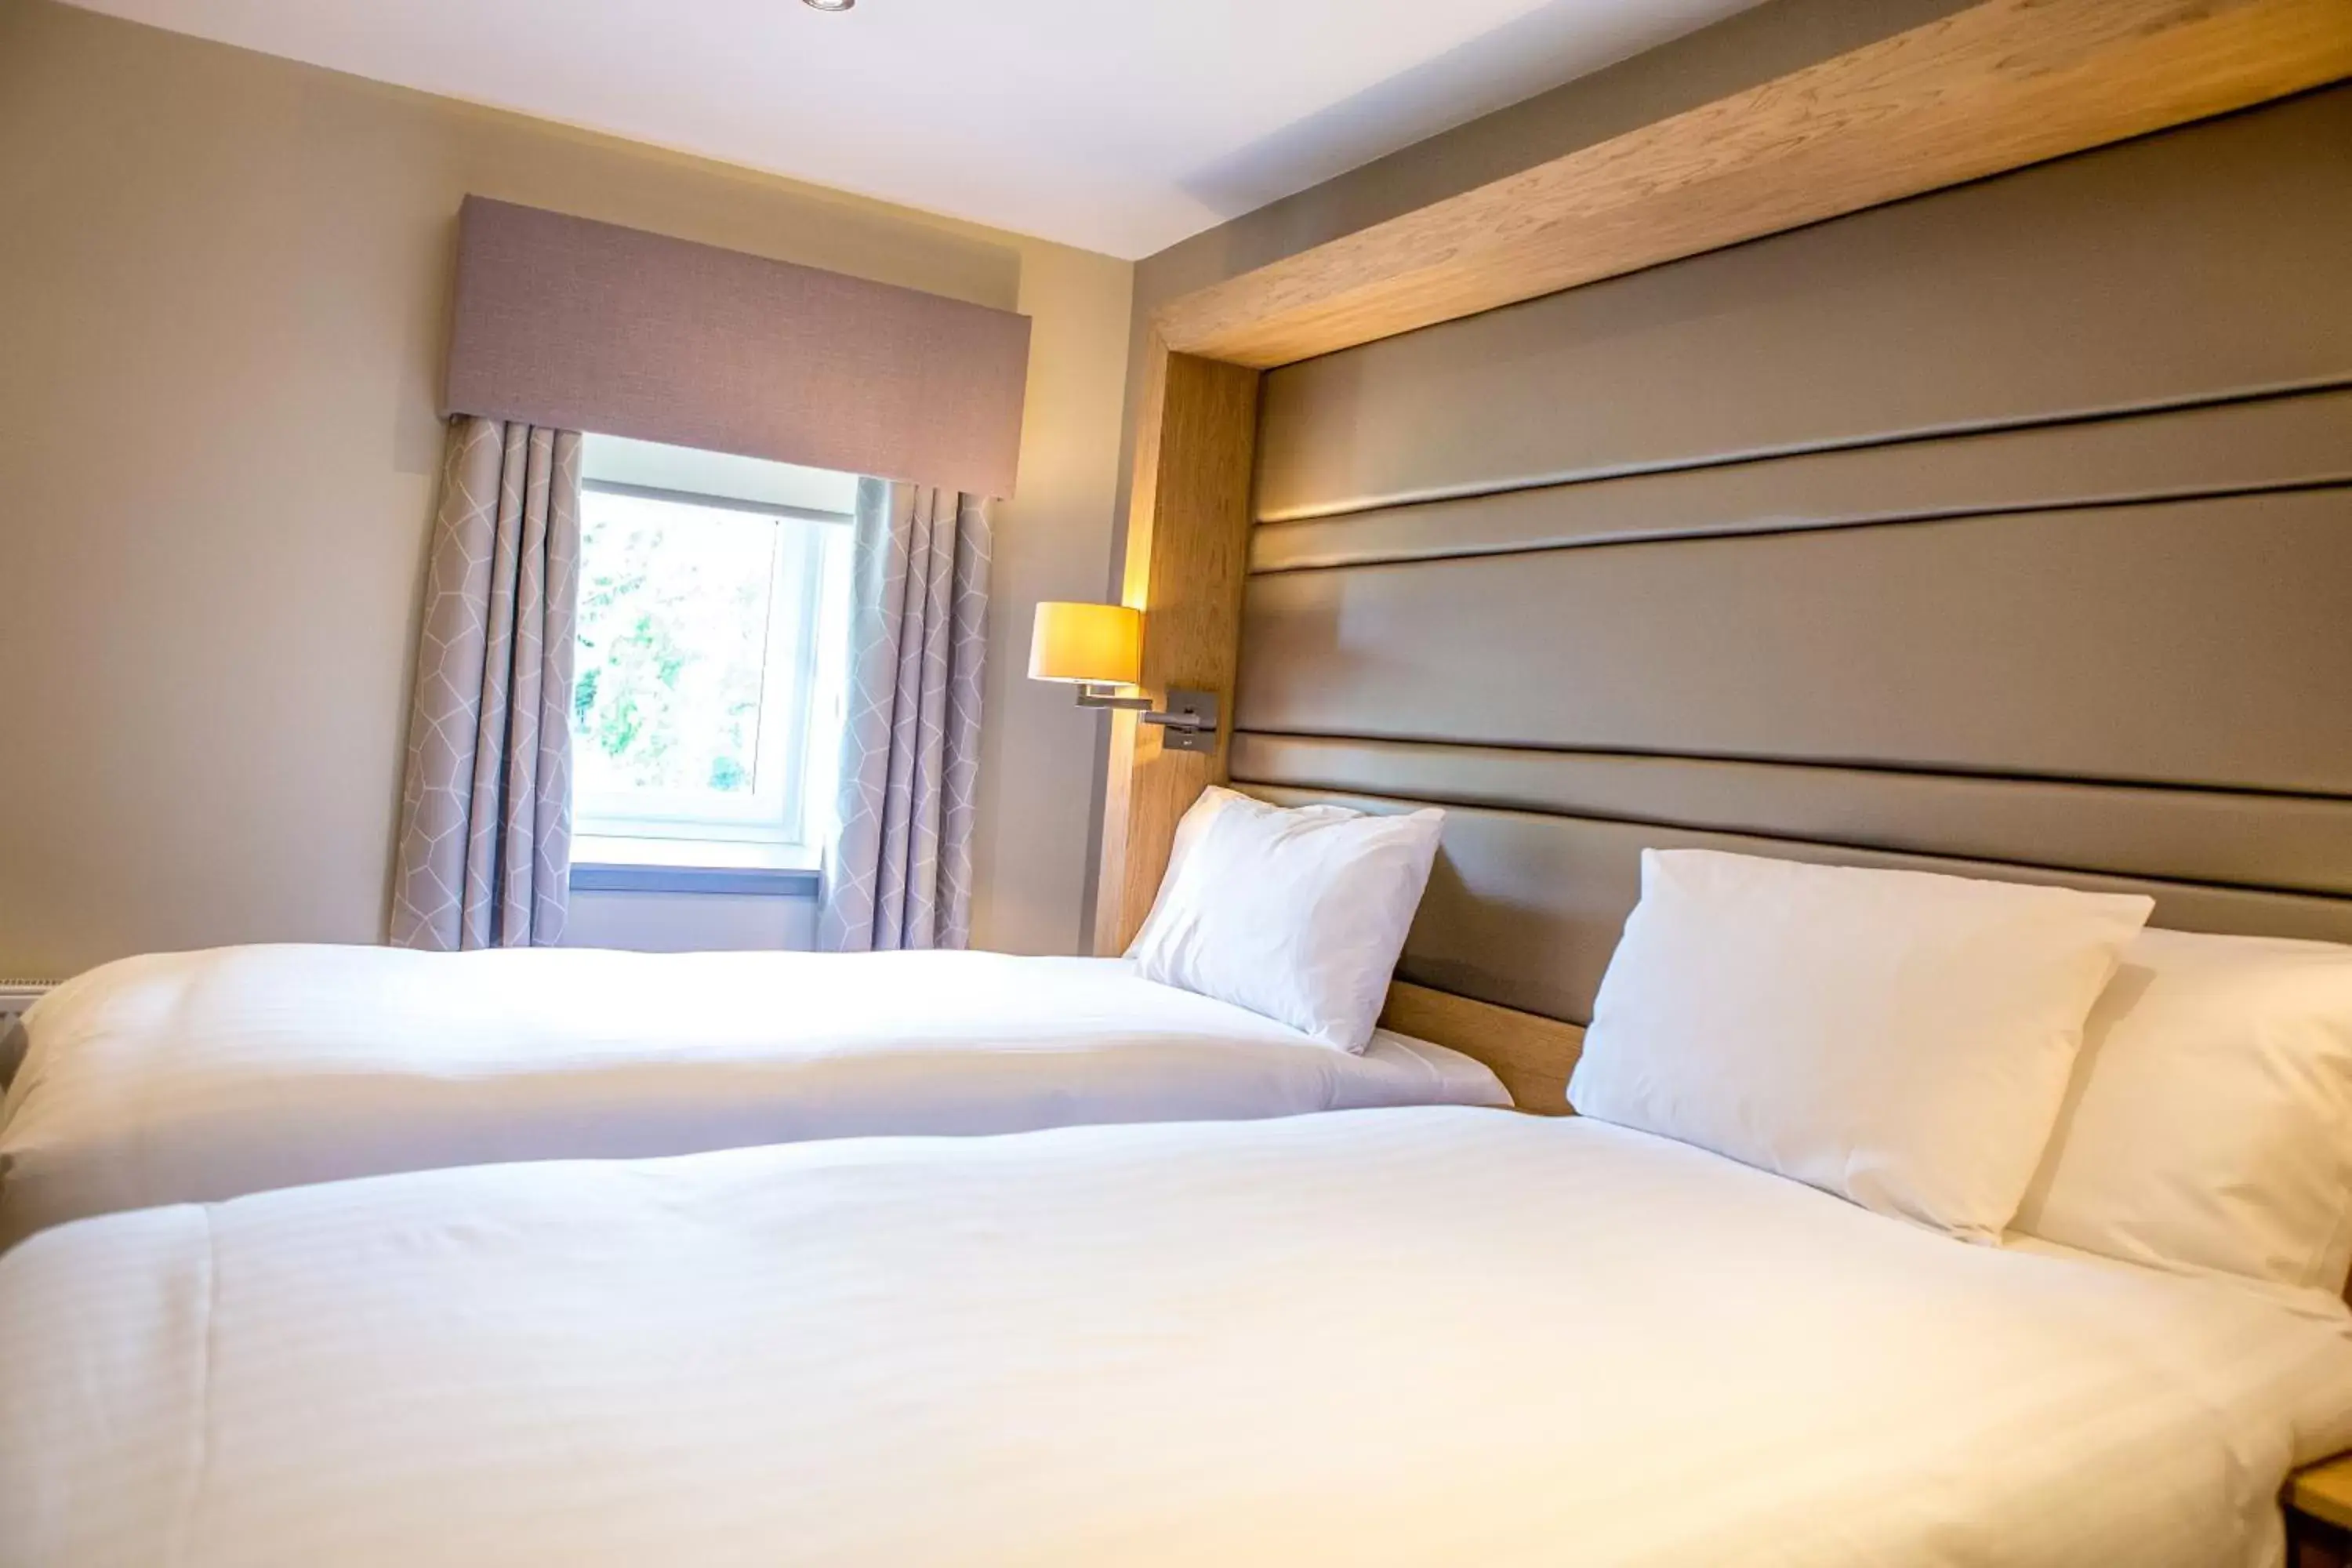 Bed in Bowfield Hotel and Spa